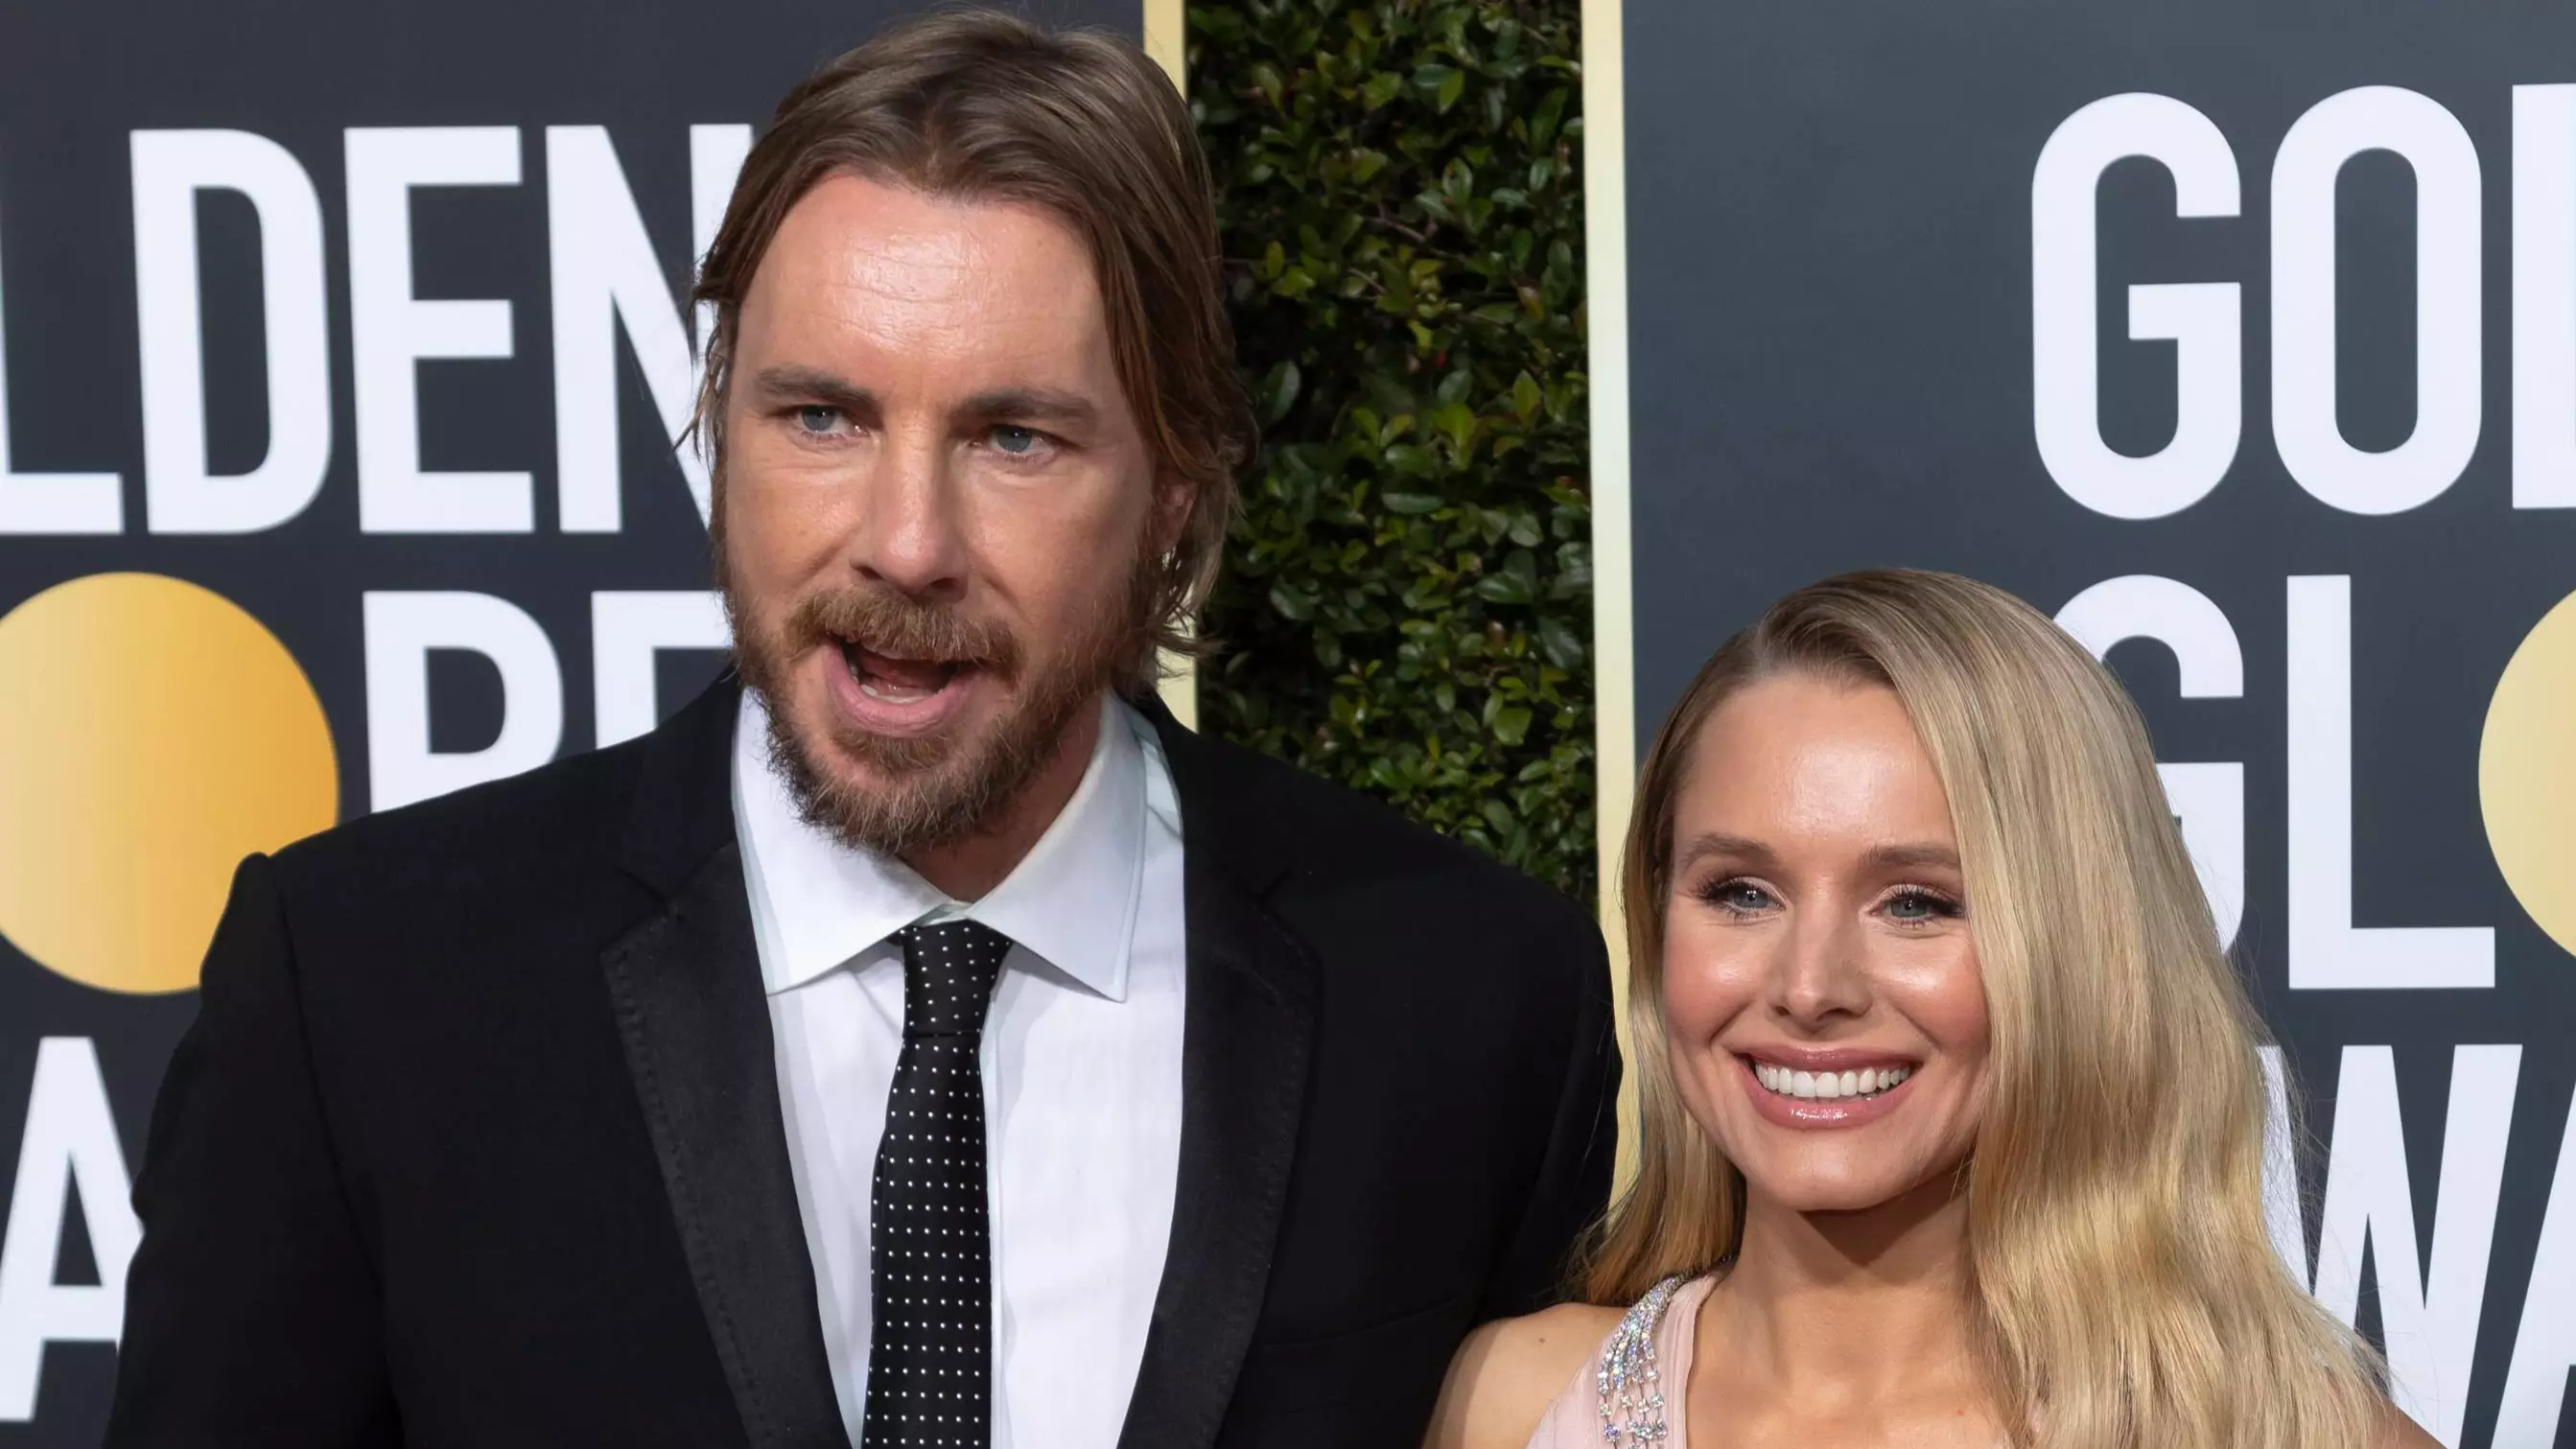 Kristen Bell Reveals Husband Dax Shepard Once Sucked Her Clogged Milk Duct While Breastfeeding